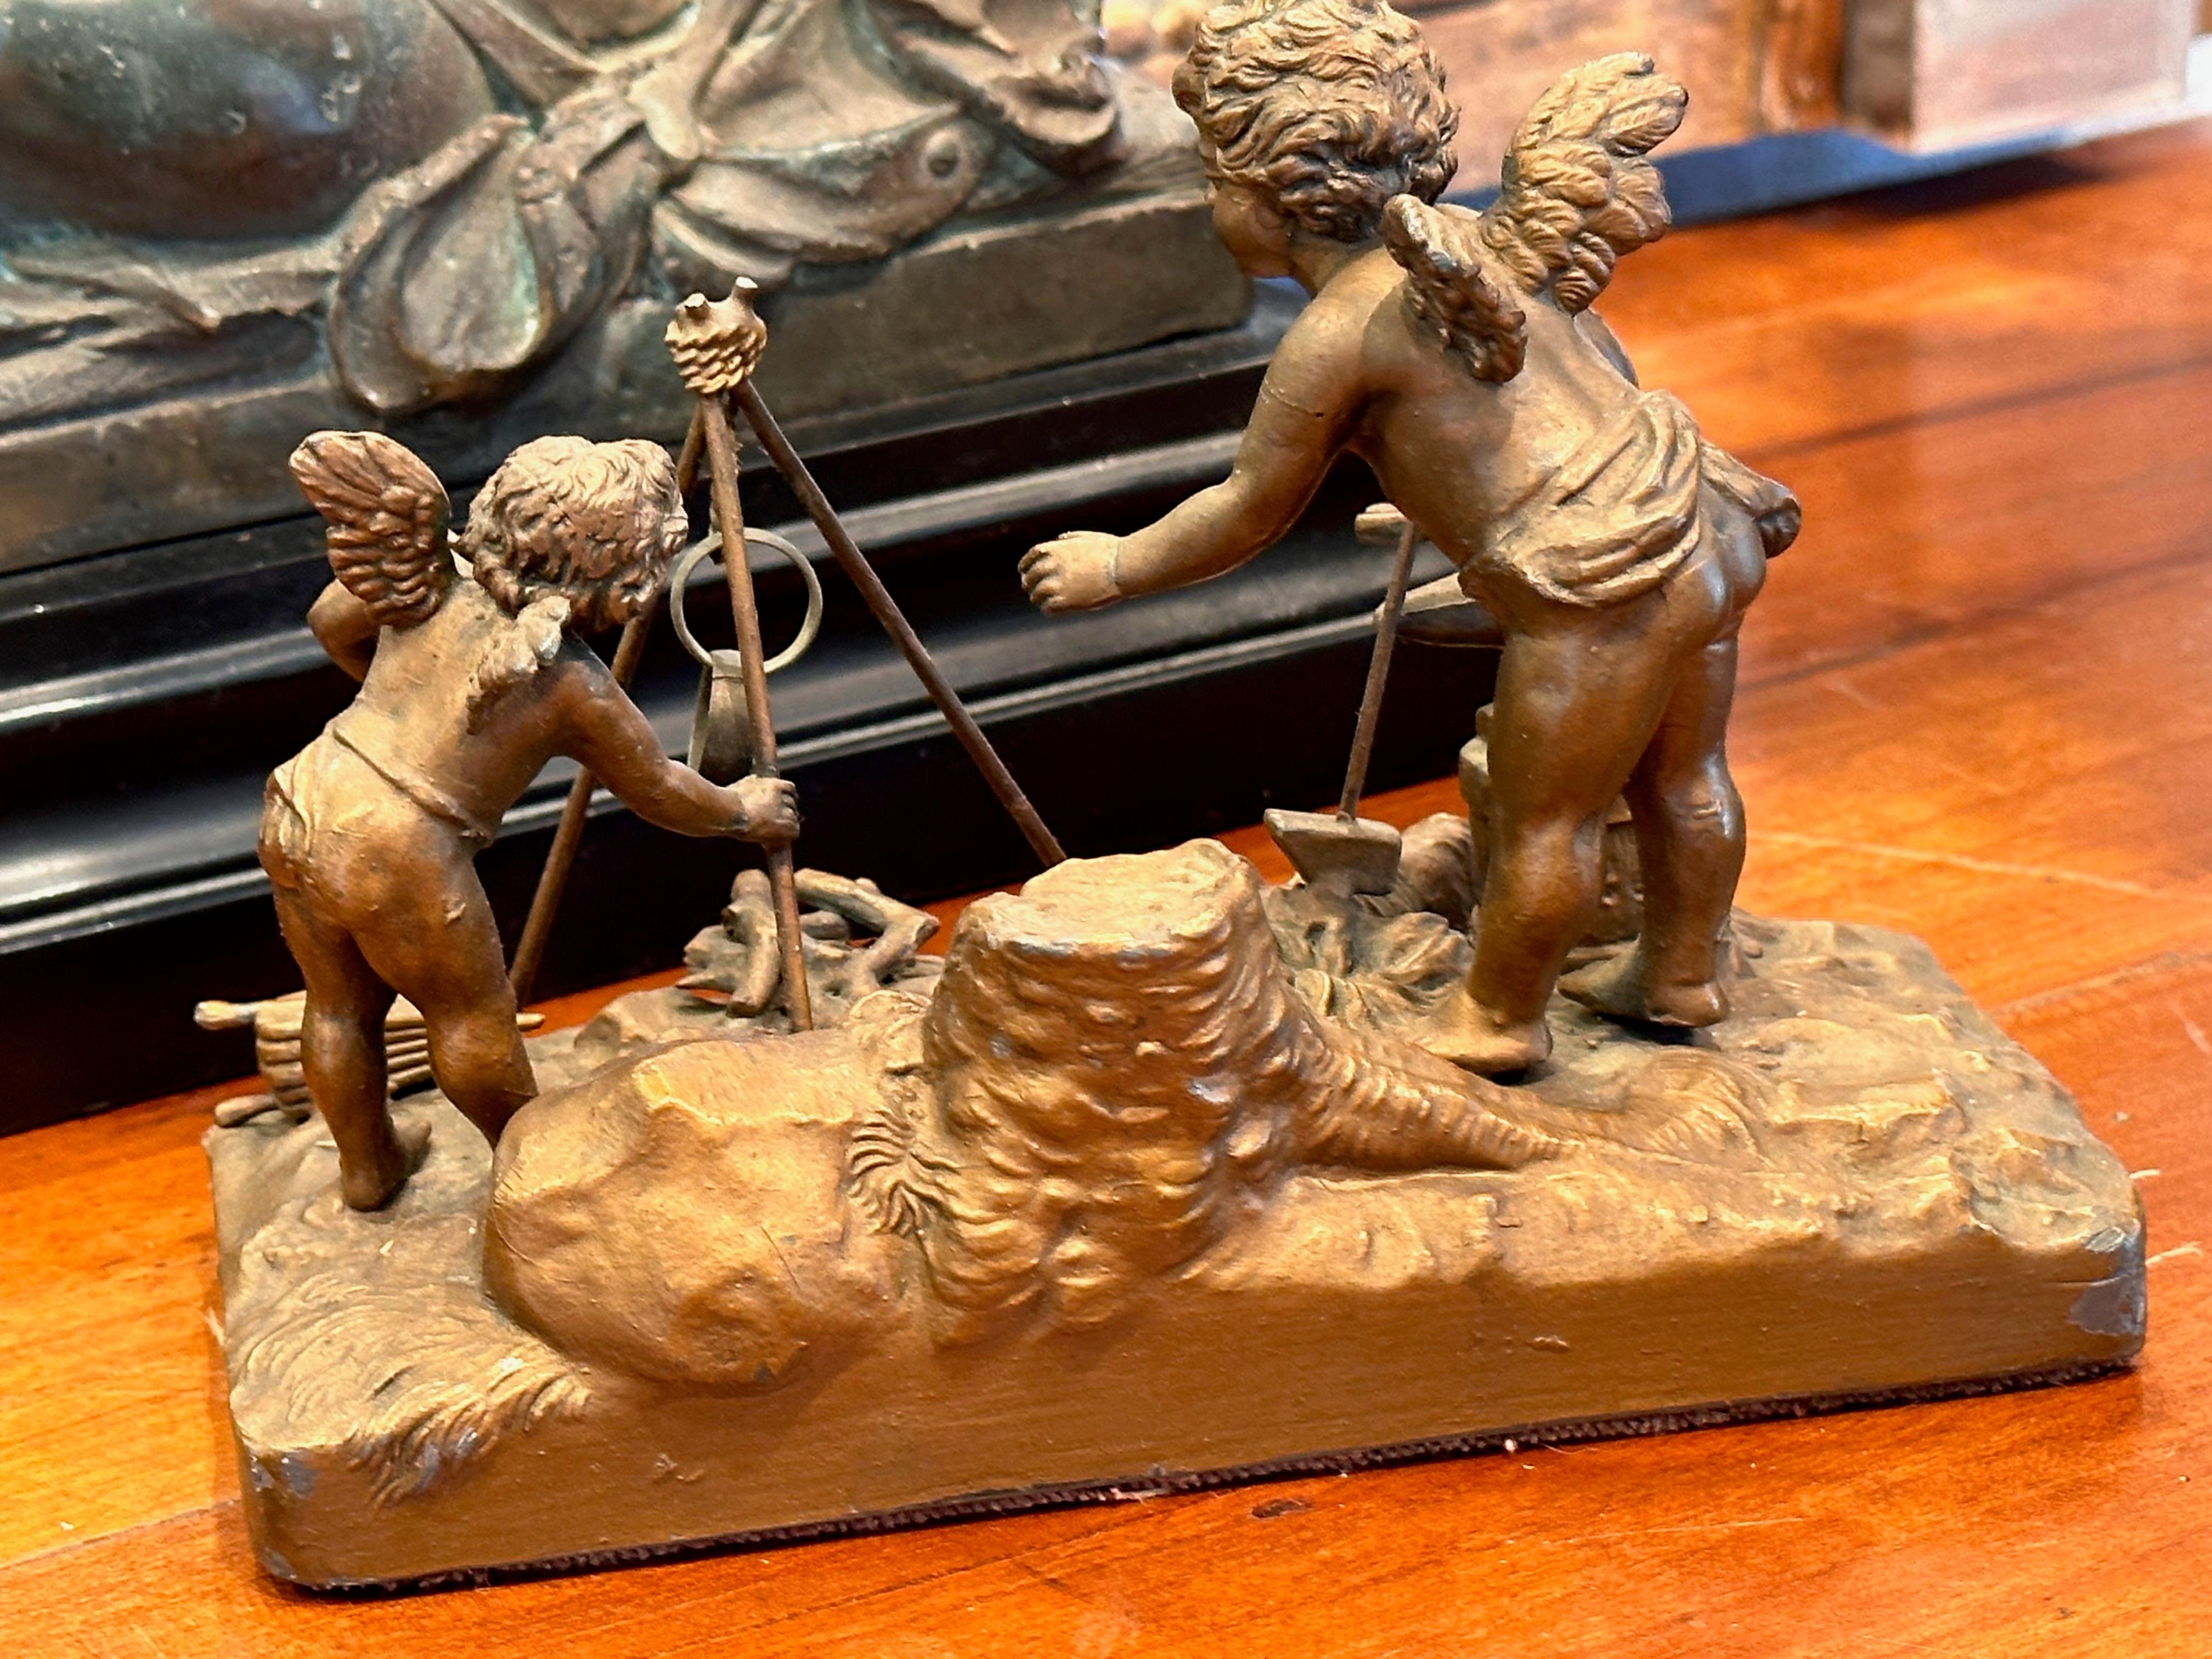 Cherubs around the fire. A bronze patinated sculpture with great detail.a great collector piece.